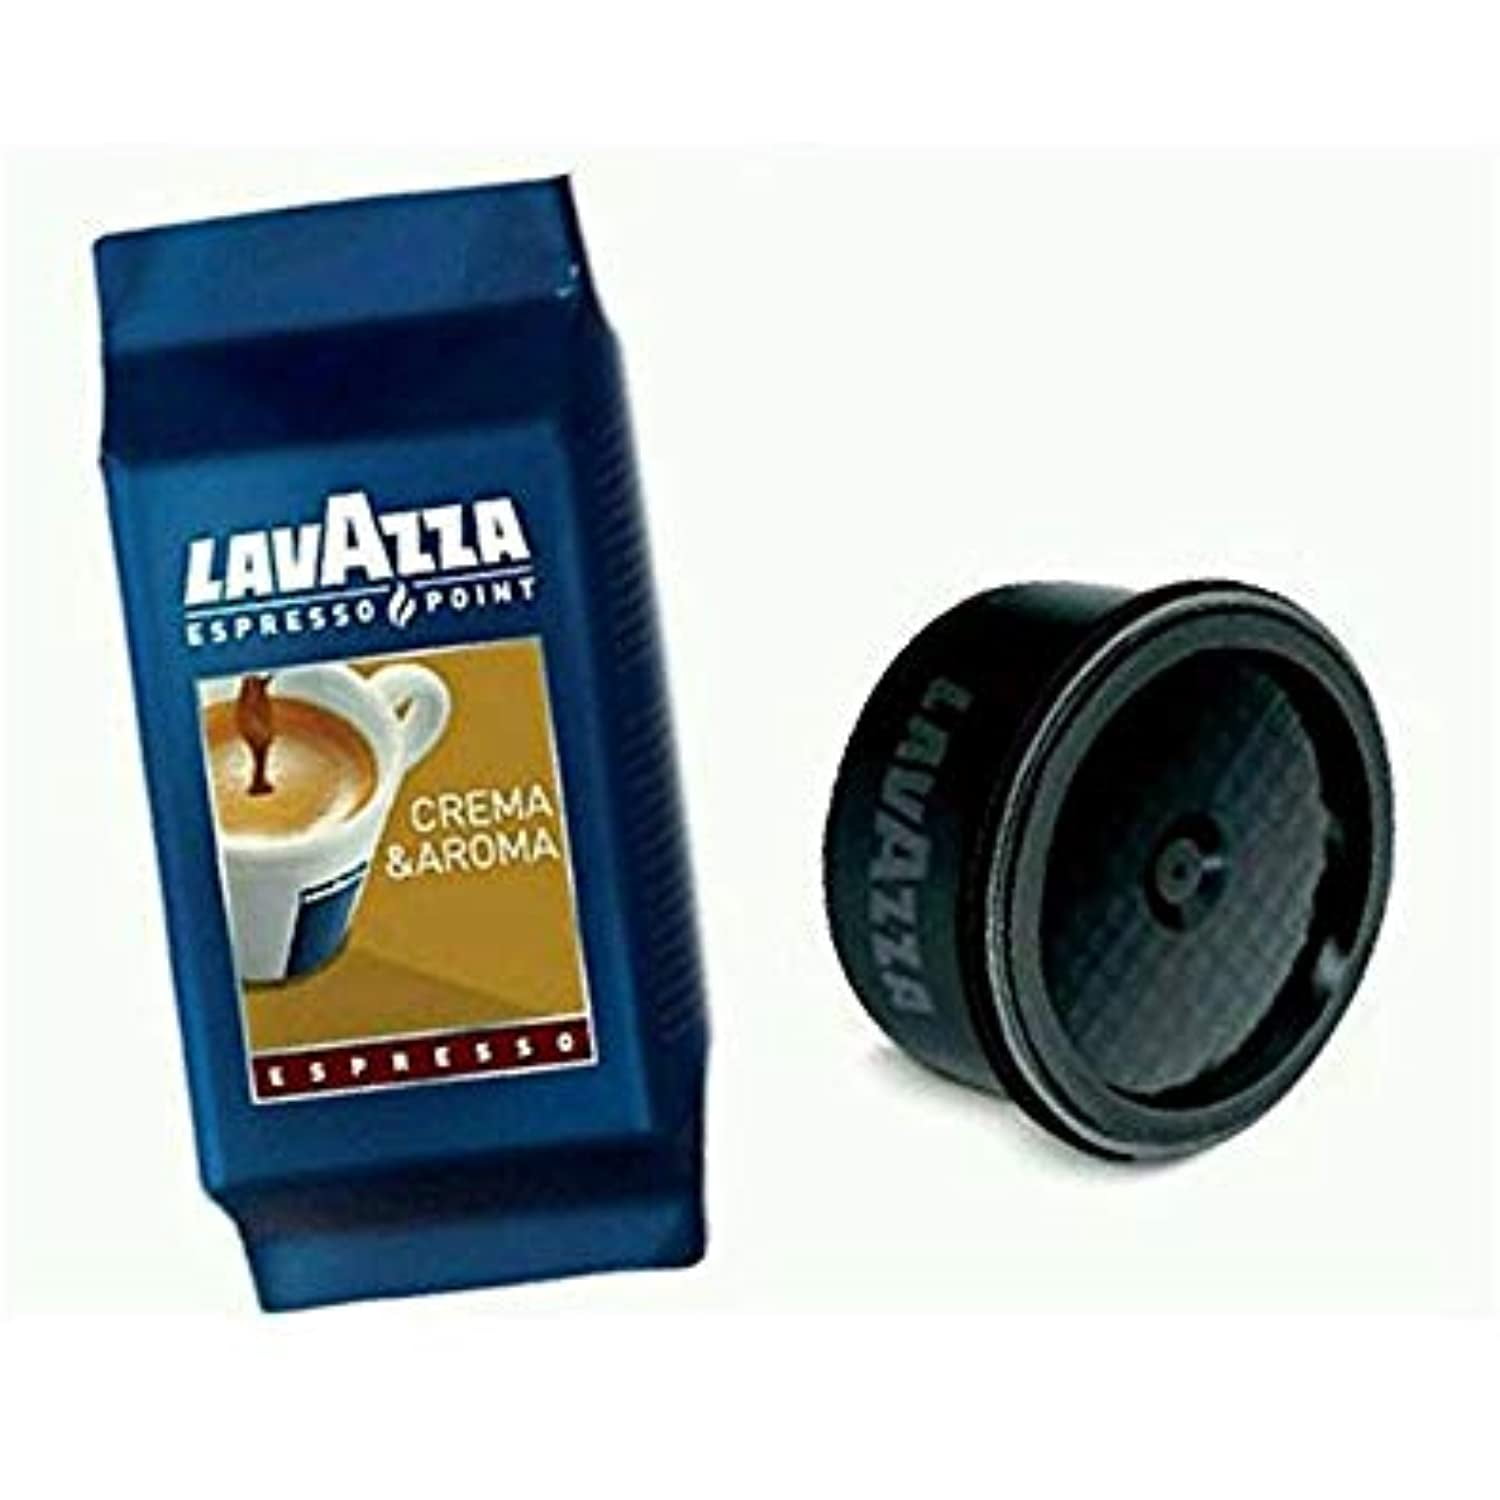 Interaction Glare Spacious Lavazza Espresso Pt. Crema E Aroma, Espresso Capsules, Count Of 100, Brown  ,Value Pack, Blended And Roasted In Italy, Intense Medium Roast With A  Strong Body And Long Lasting Flavor - Walmart.com